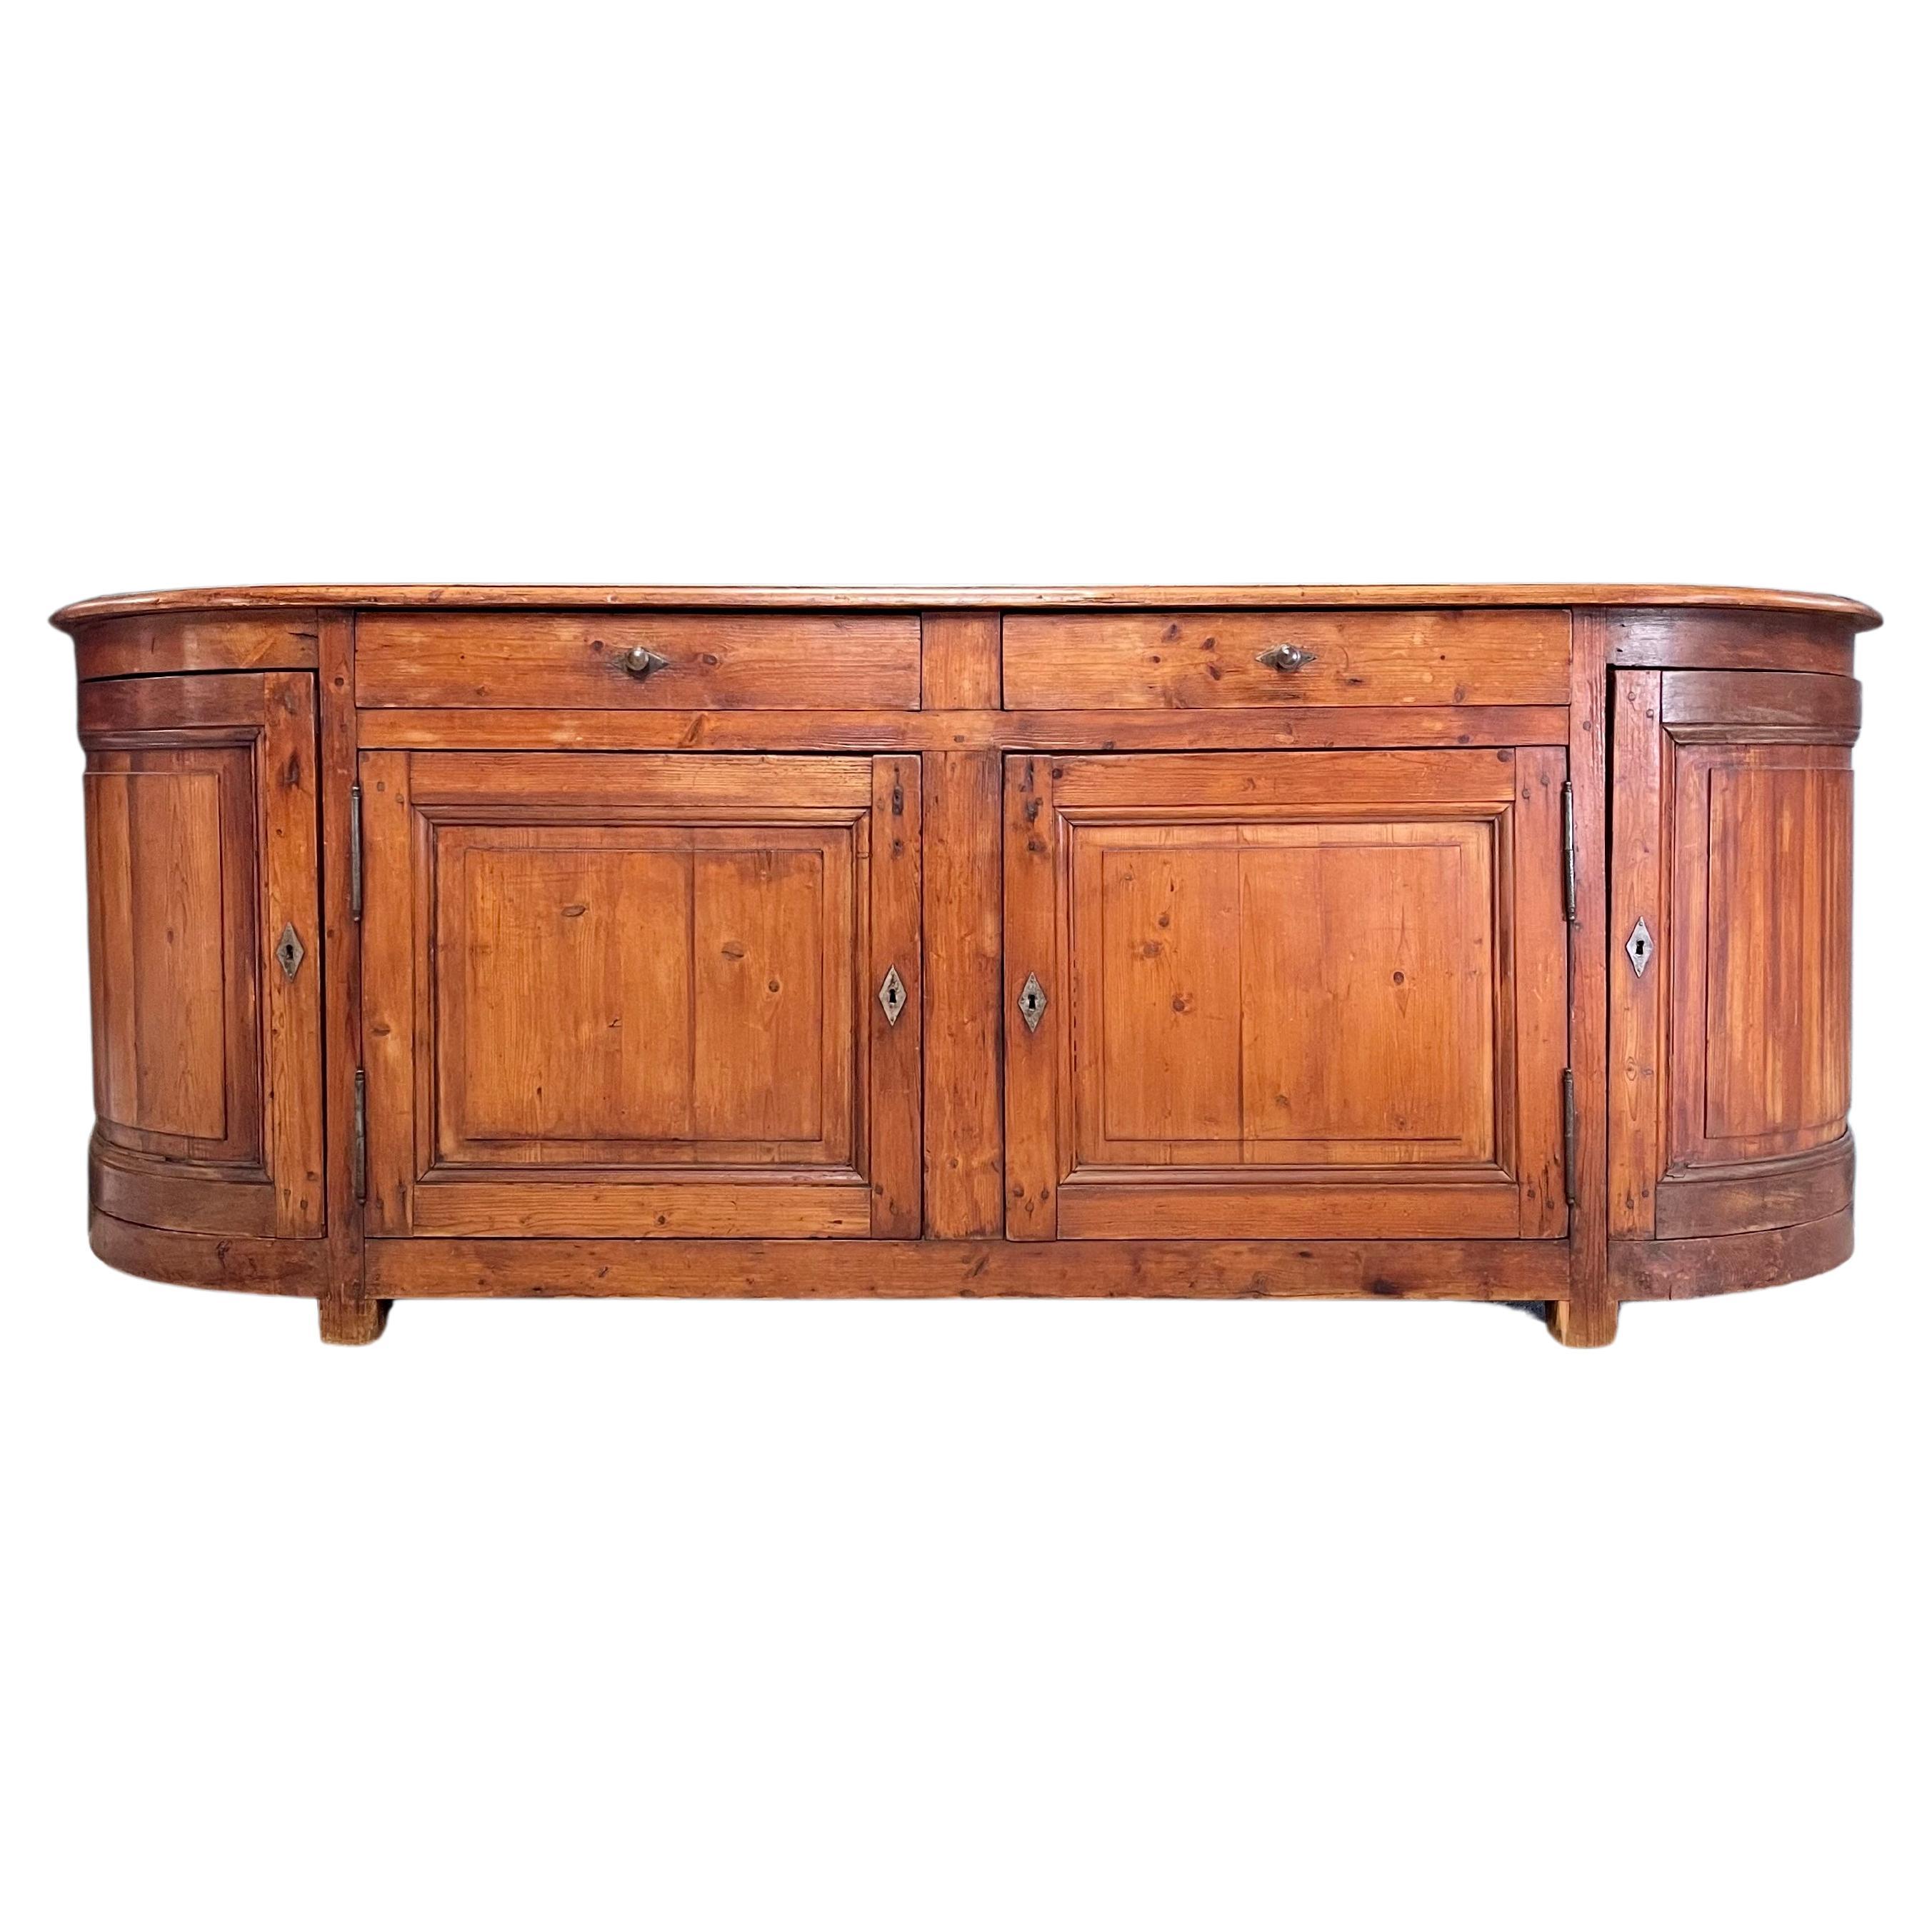 Mid 19th C French Savoyard 4 door Curved Sideboard / Buffet, Console, Credenza For Sale